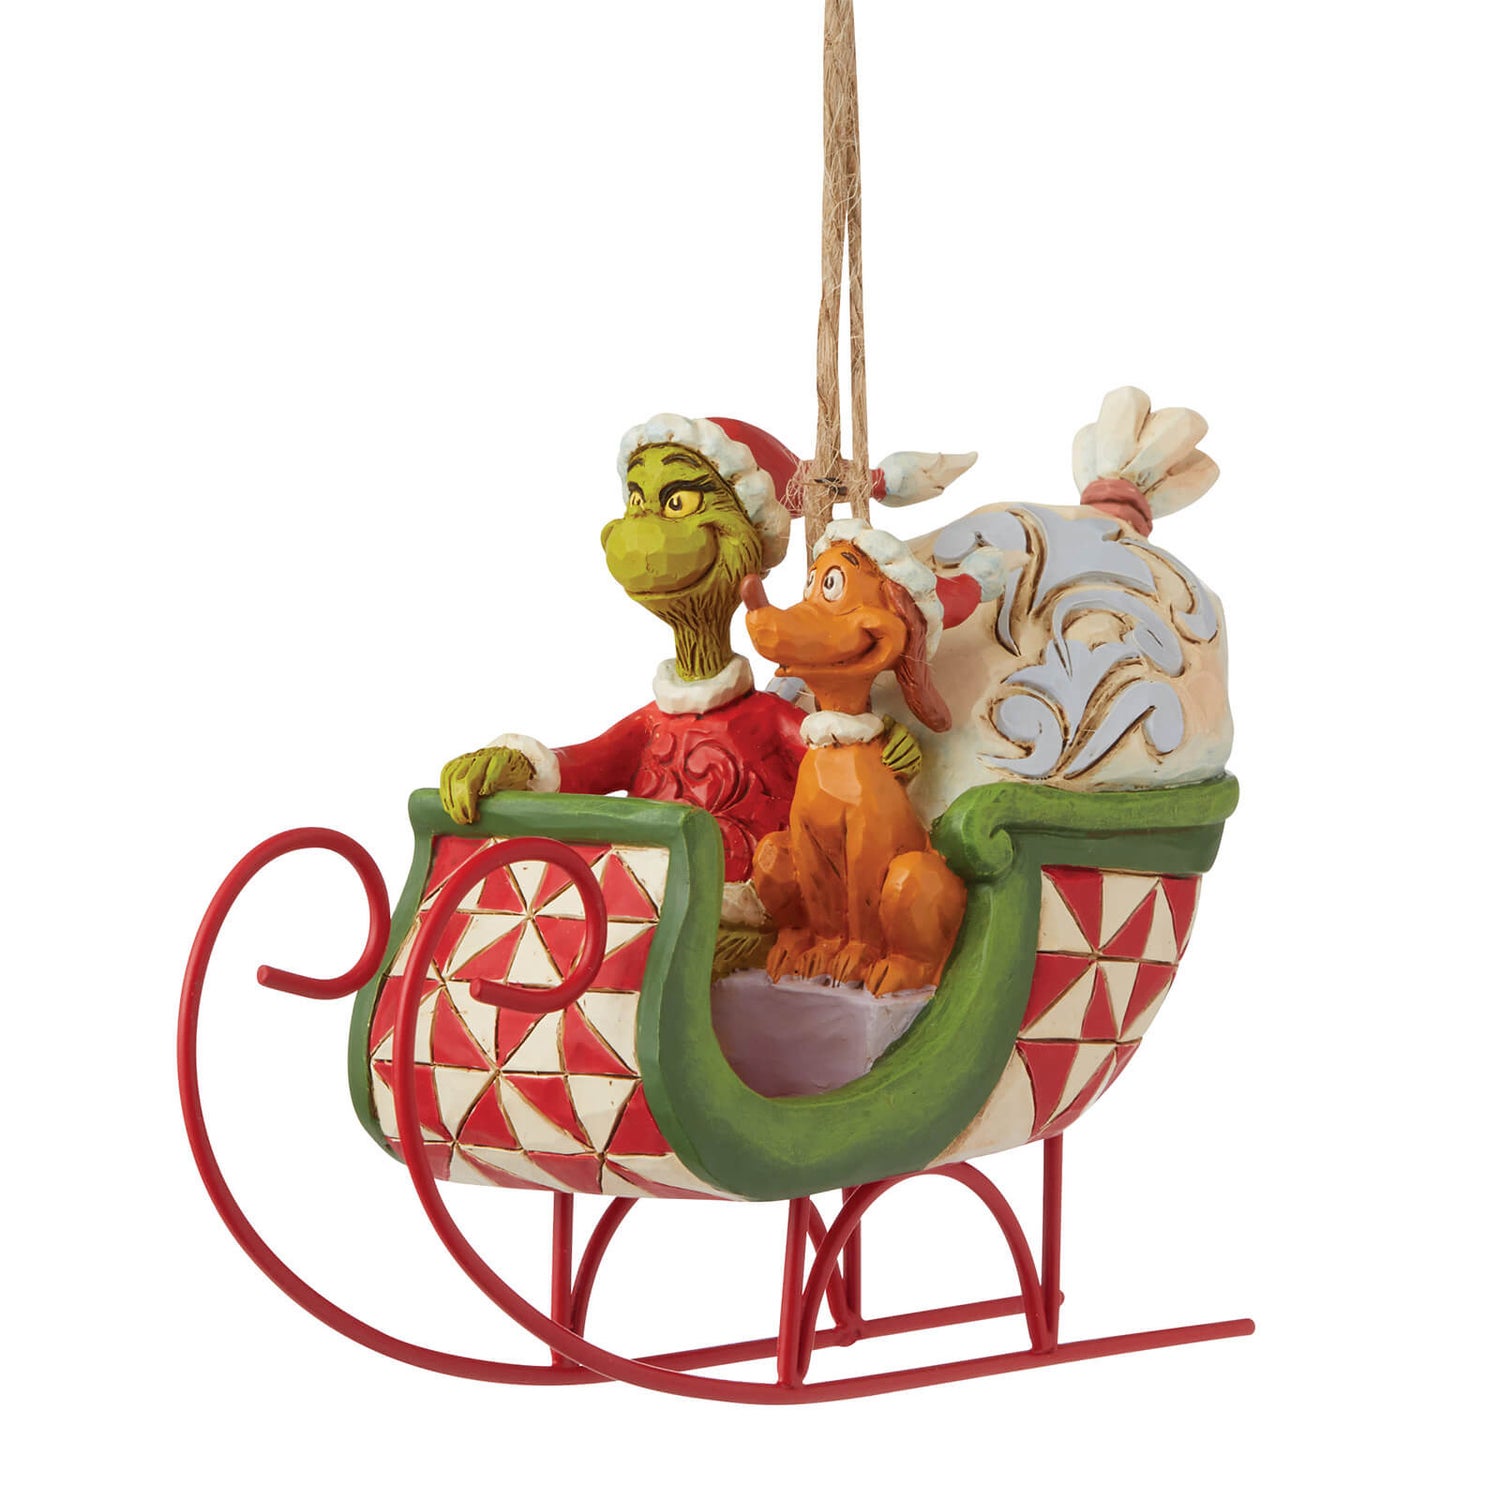 The Grinch By Jim Shore Grinch & Max In Sleigh Hanging Ornament